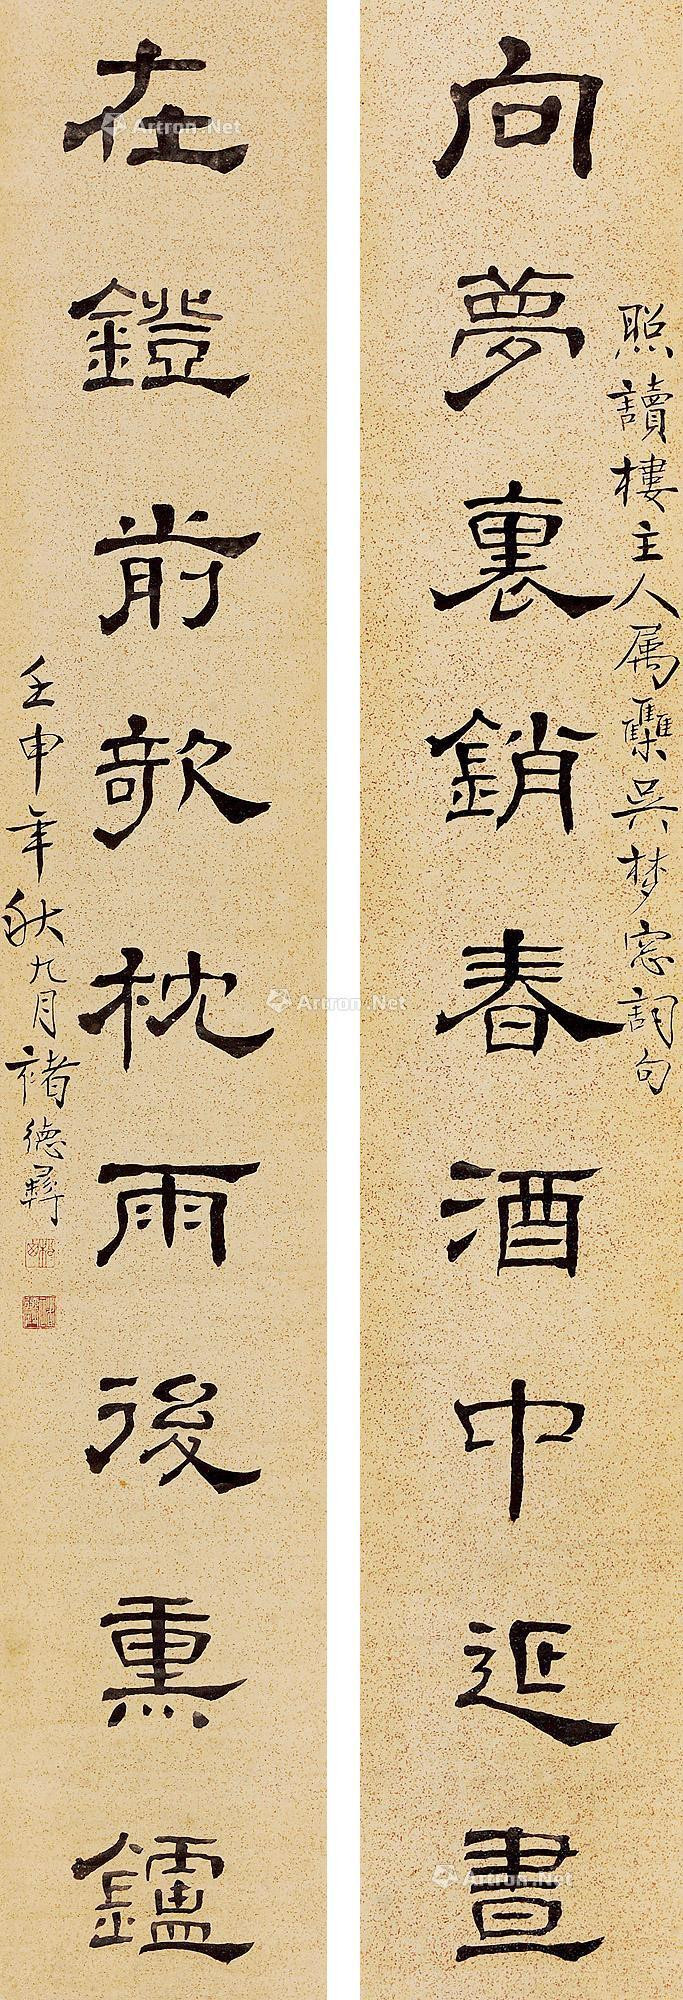 NINE-CHARACTER CALLIGRAPHY COUPLET IN OFFICIAL SCRIPT